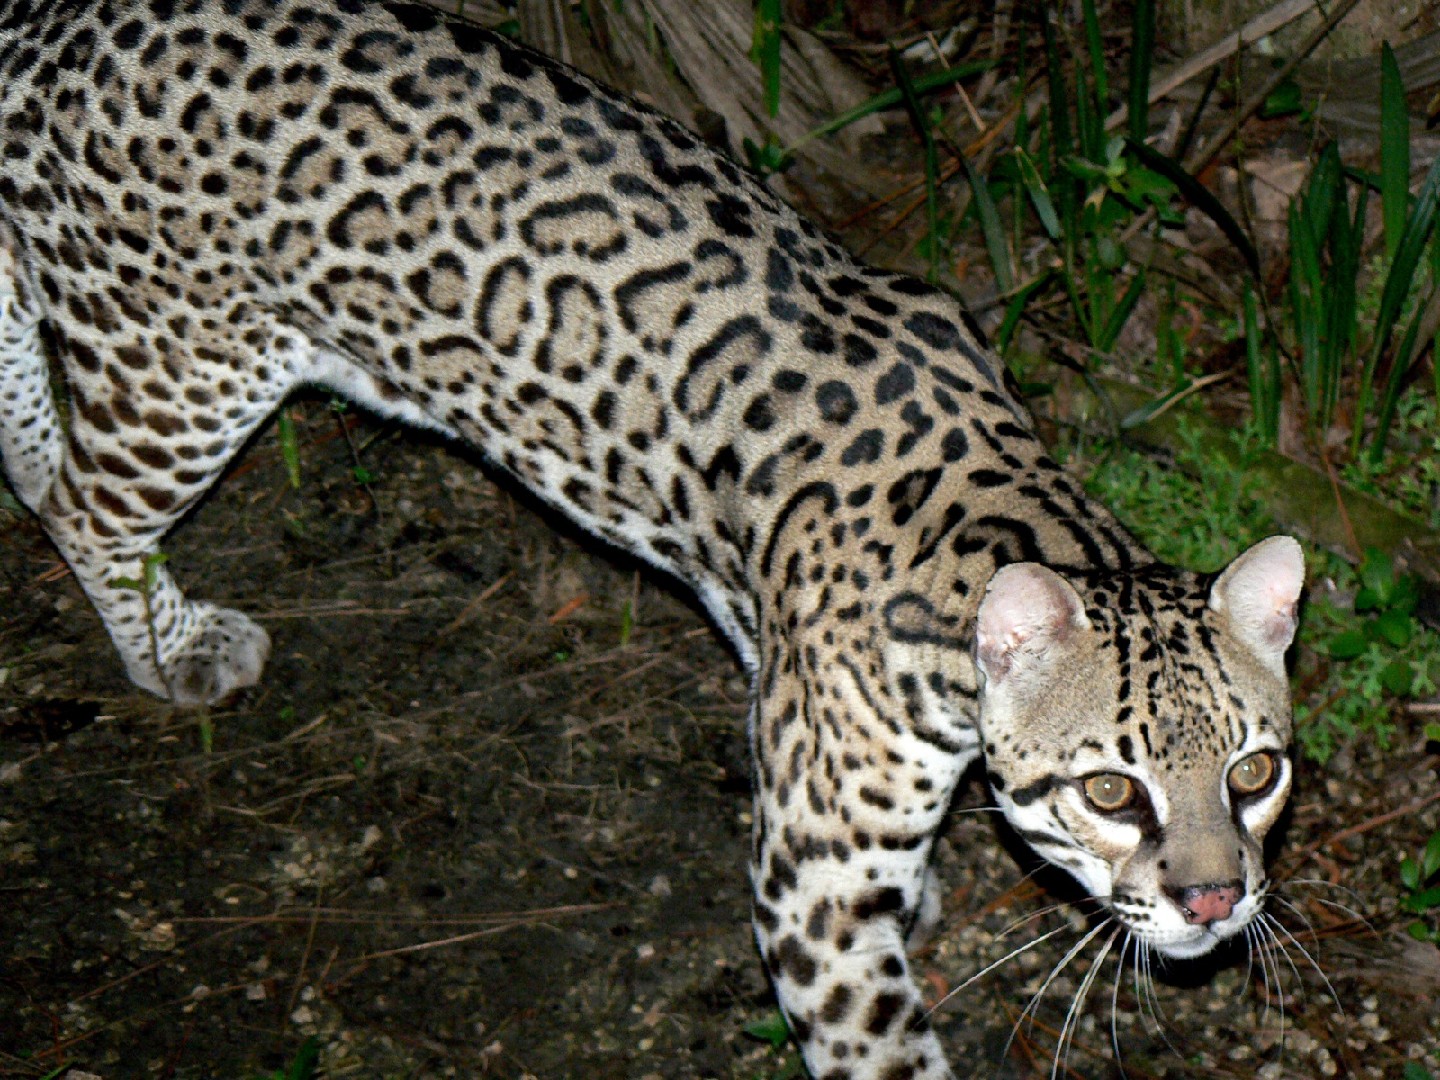 American spotted cats (Leopardus)